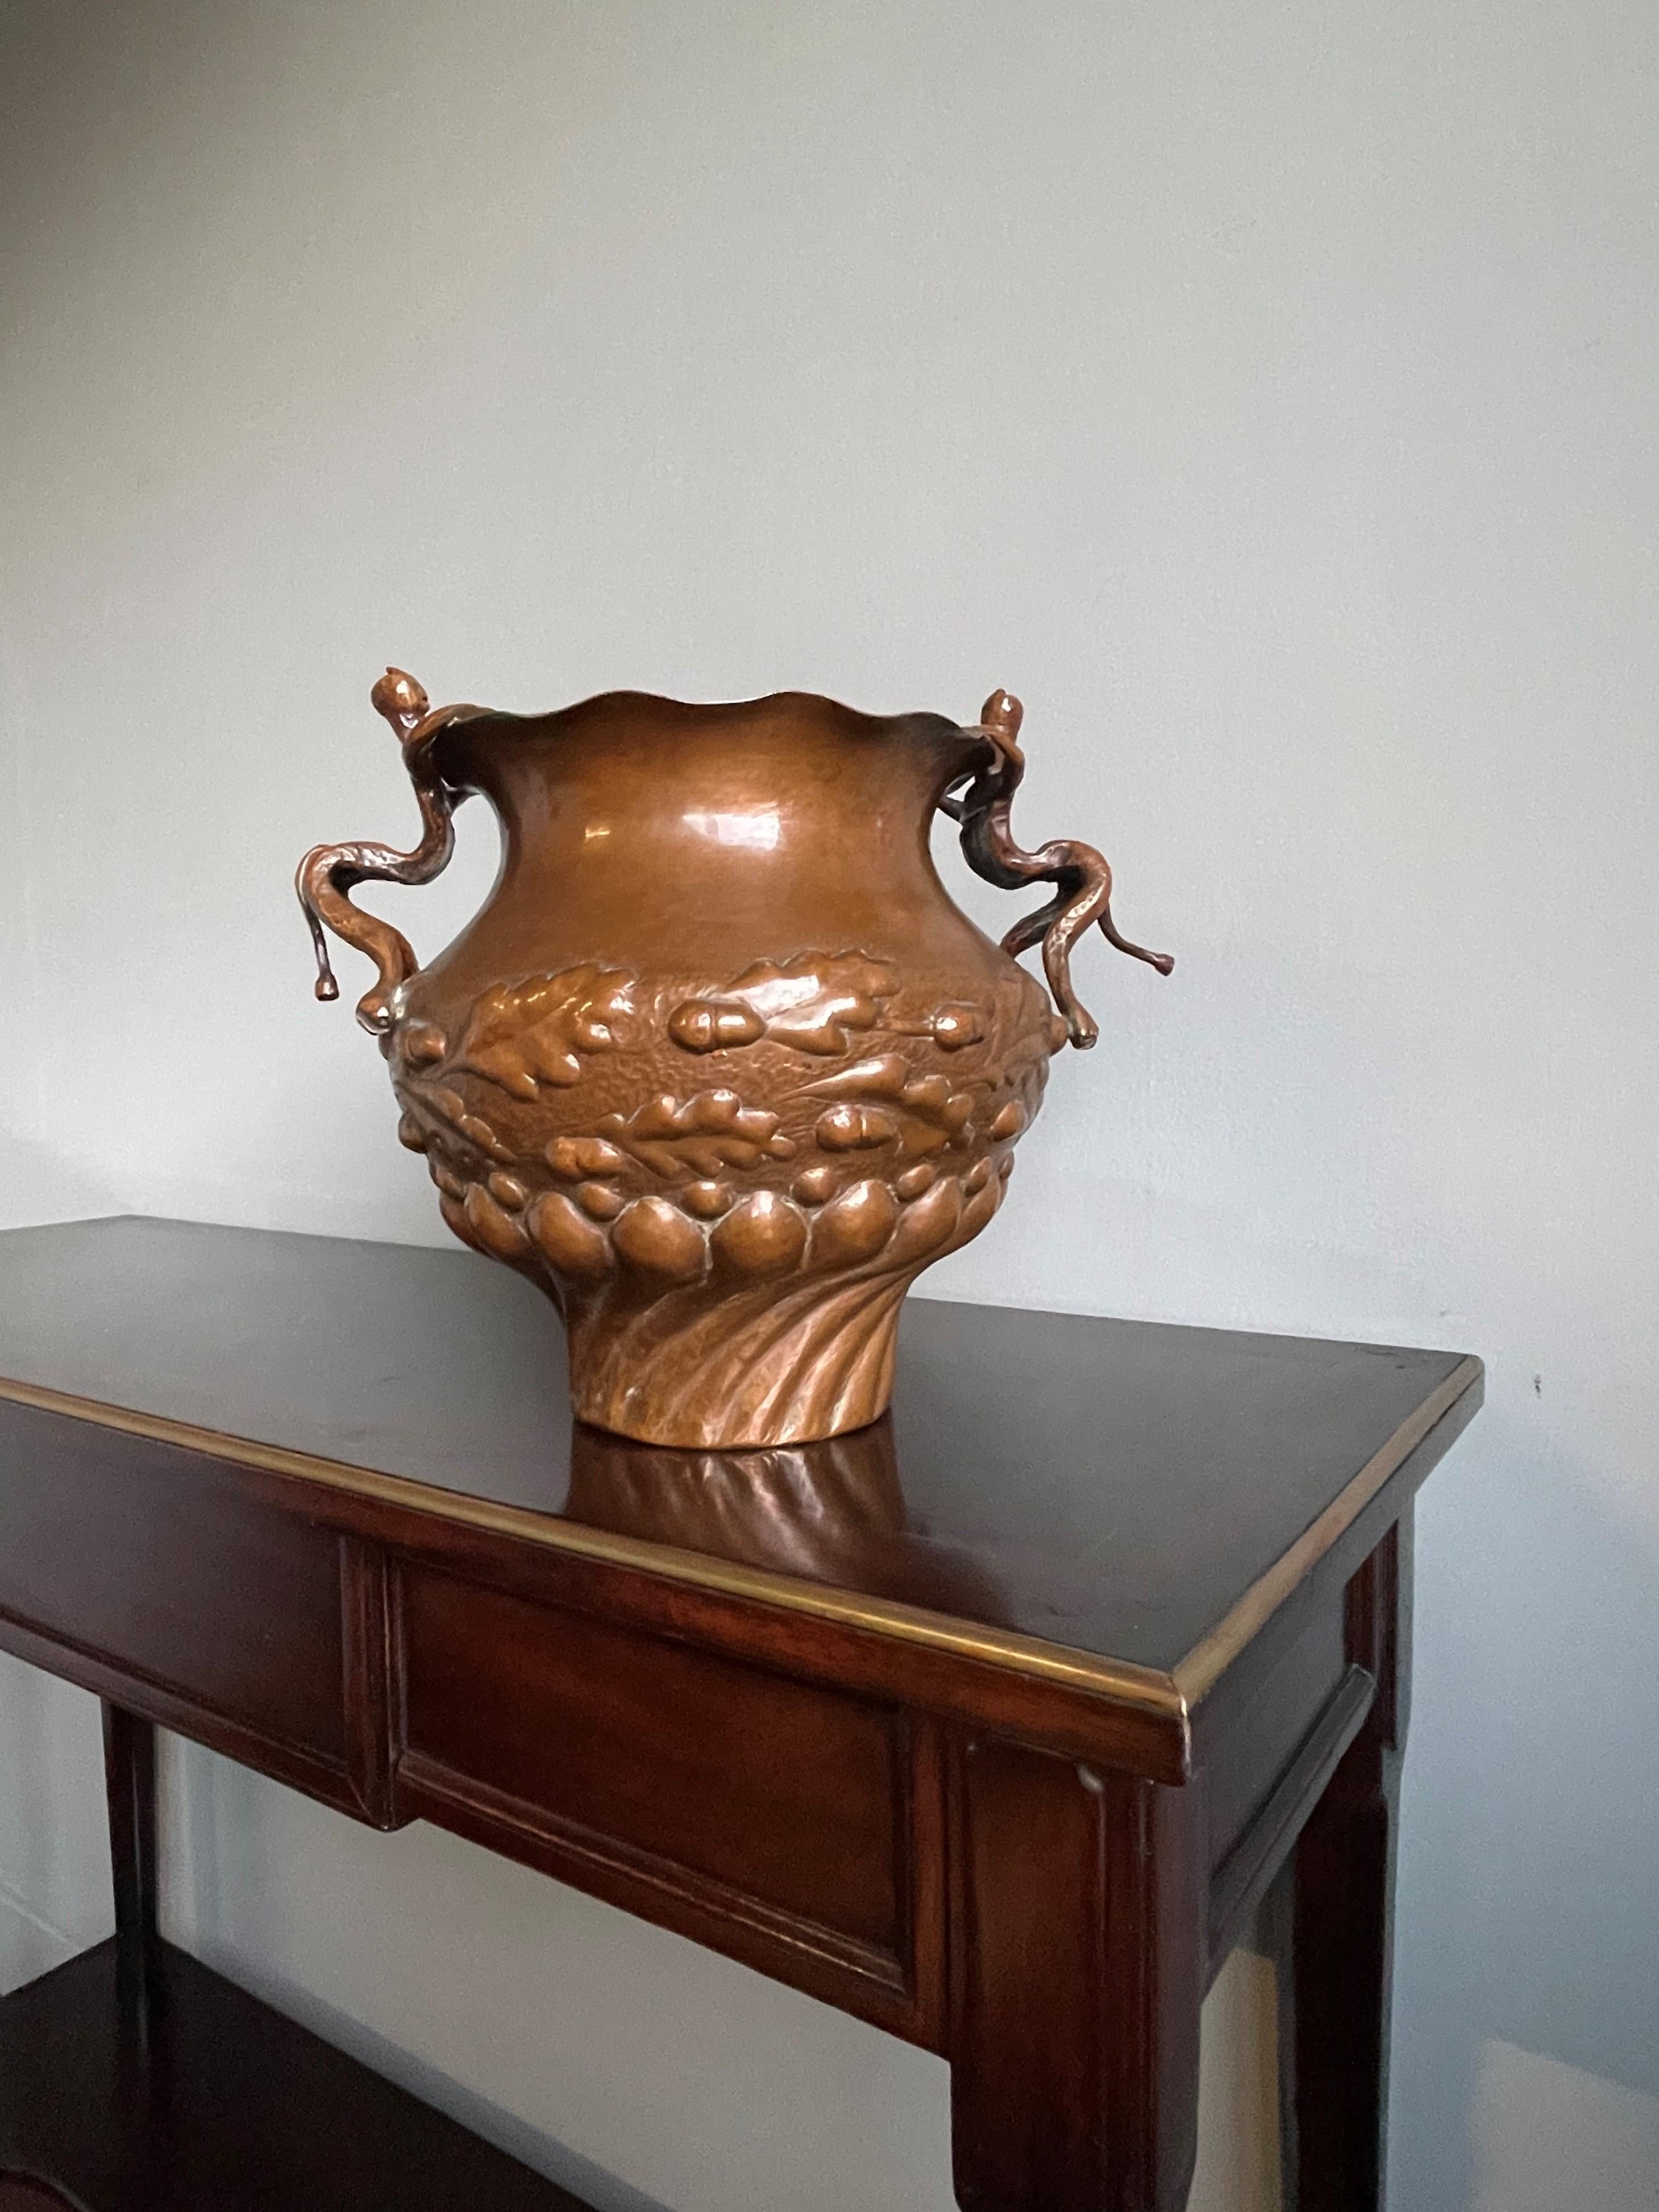 19th Century Unique Mid 1800s Embossed Copper Planter / Vase with Satyr Sculptures as Handles For Sale